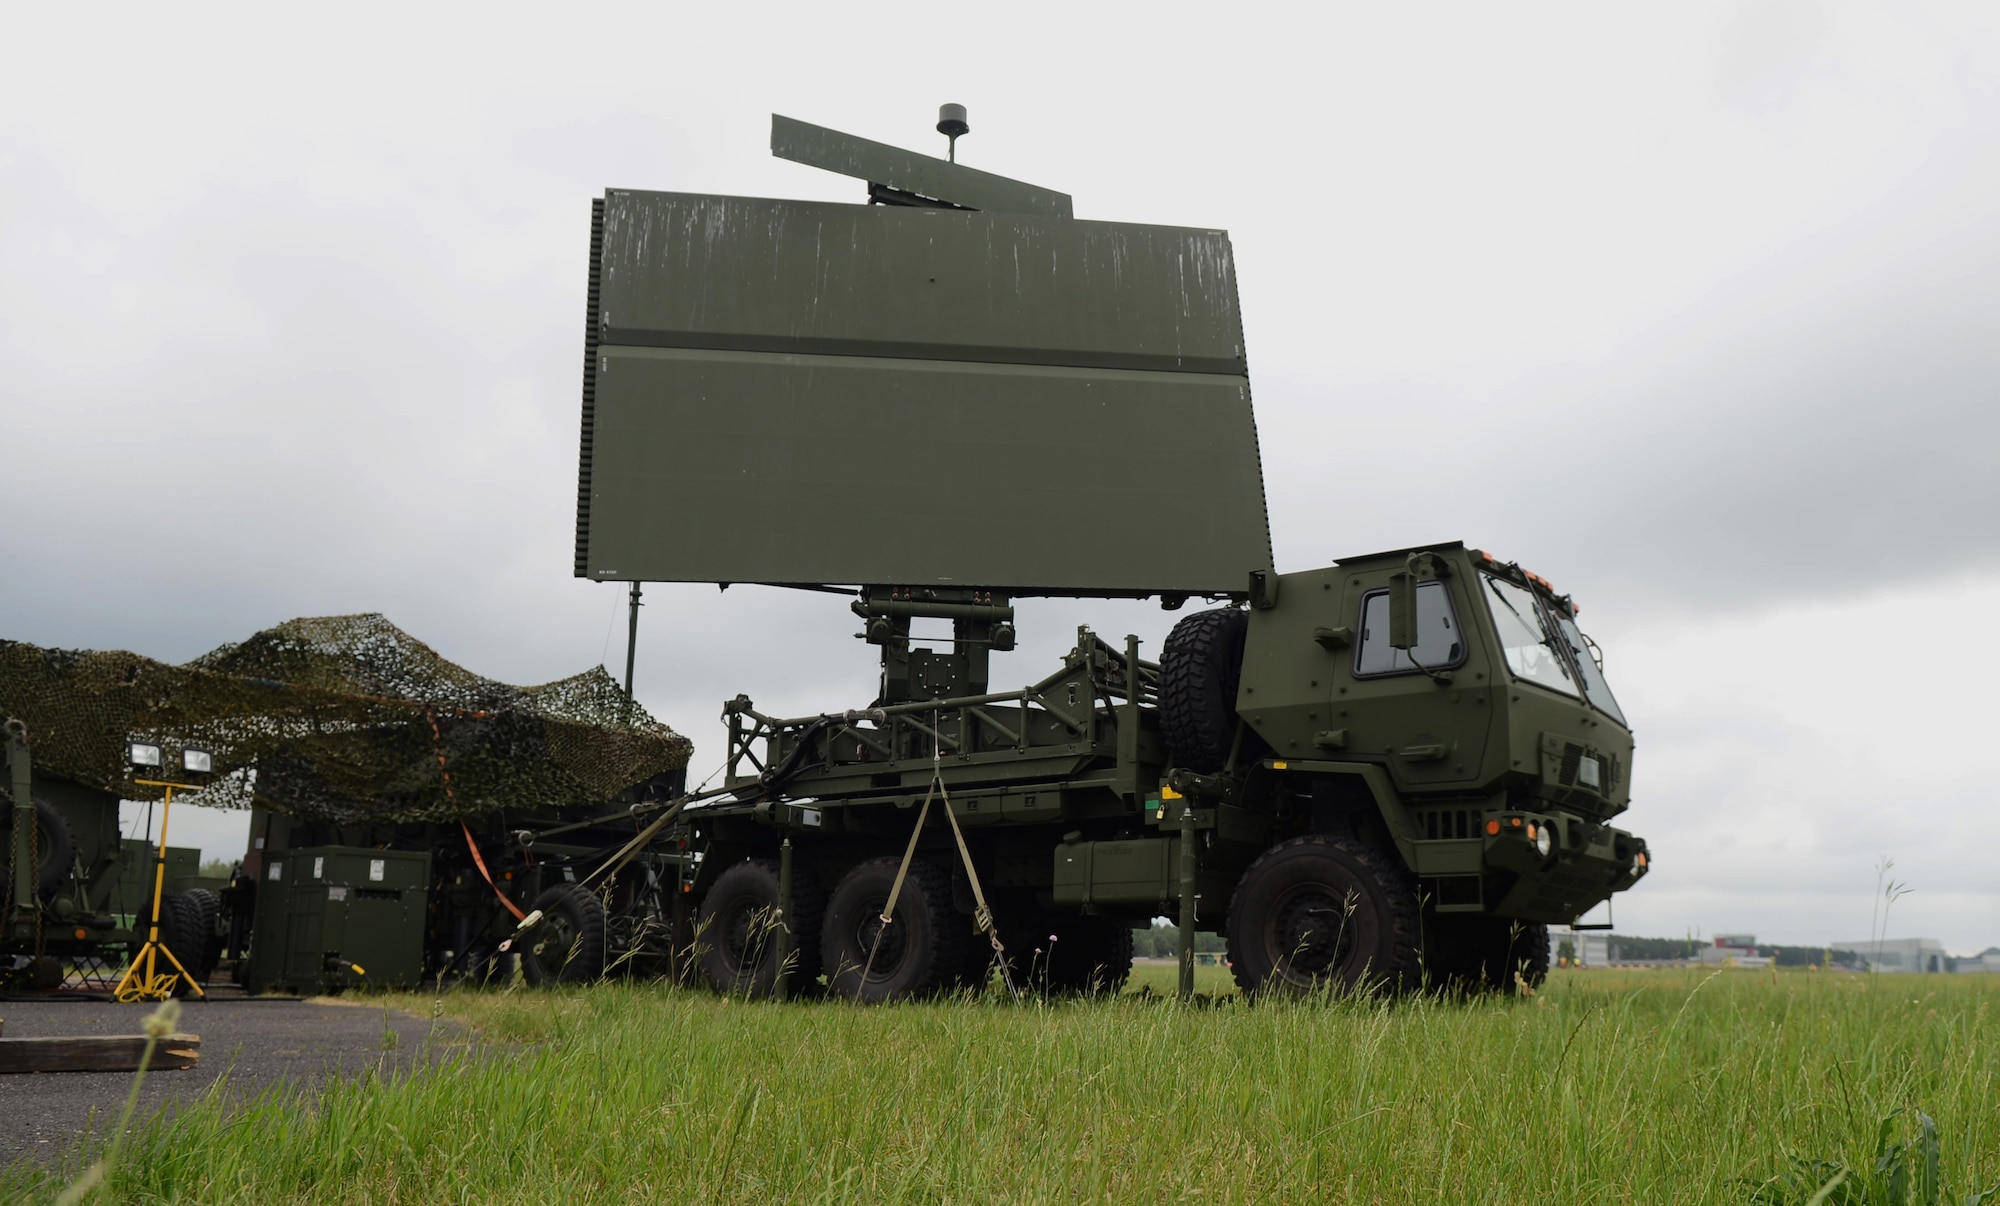 Radar equipment from the 606th Expeditionary Air Control Squadron rotates to gather data June 12, 2014, at Powidz Air Base, Poland. The 606th EACS will serve as a Control and Reporting Center that provides tactical control to the aircraft participating in Poland's EAGLE TALON exercise and the U.S. Air Force Aviation Detachment's Rotation 14-3 training exercise. (U.S. Air Force photo/Airman 1st Class Kyla Gifford/Released)